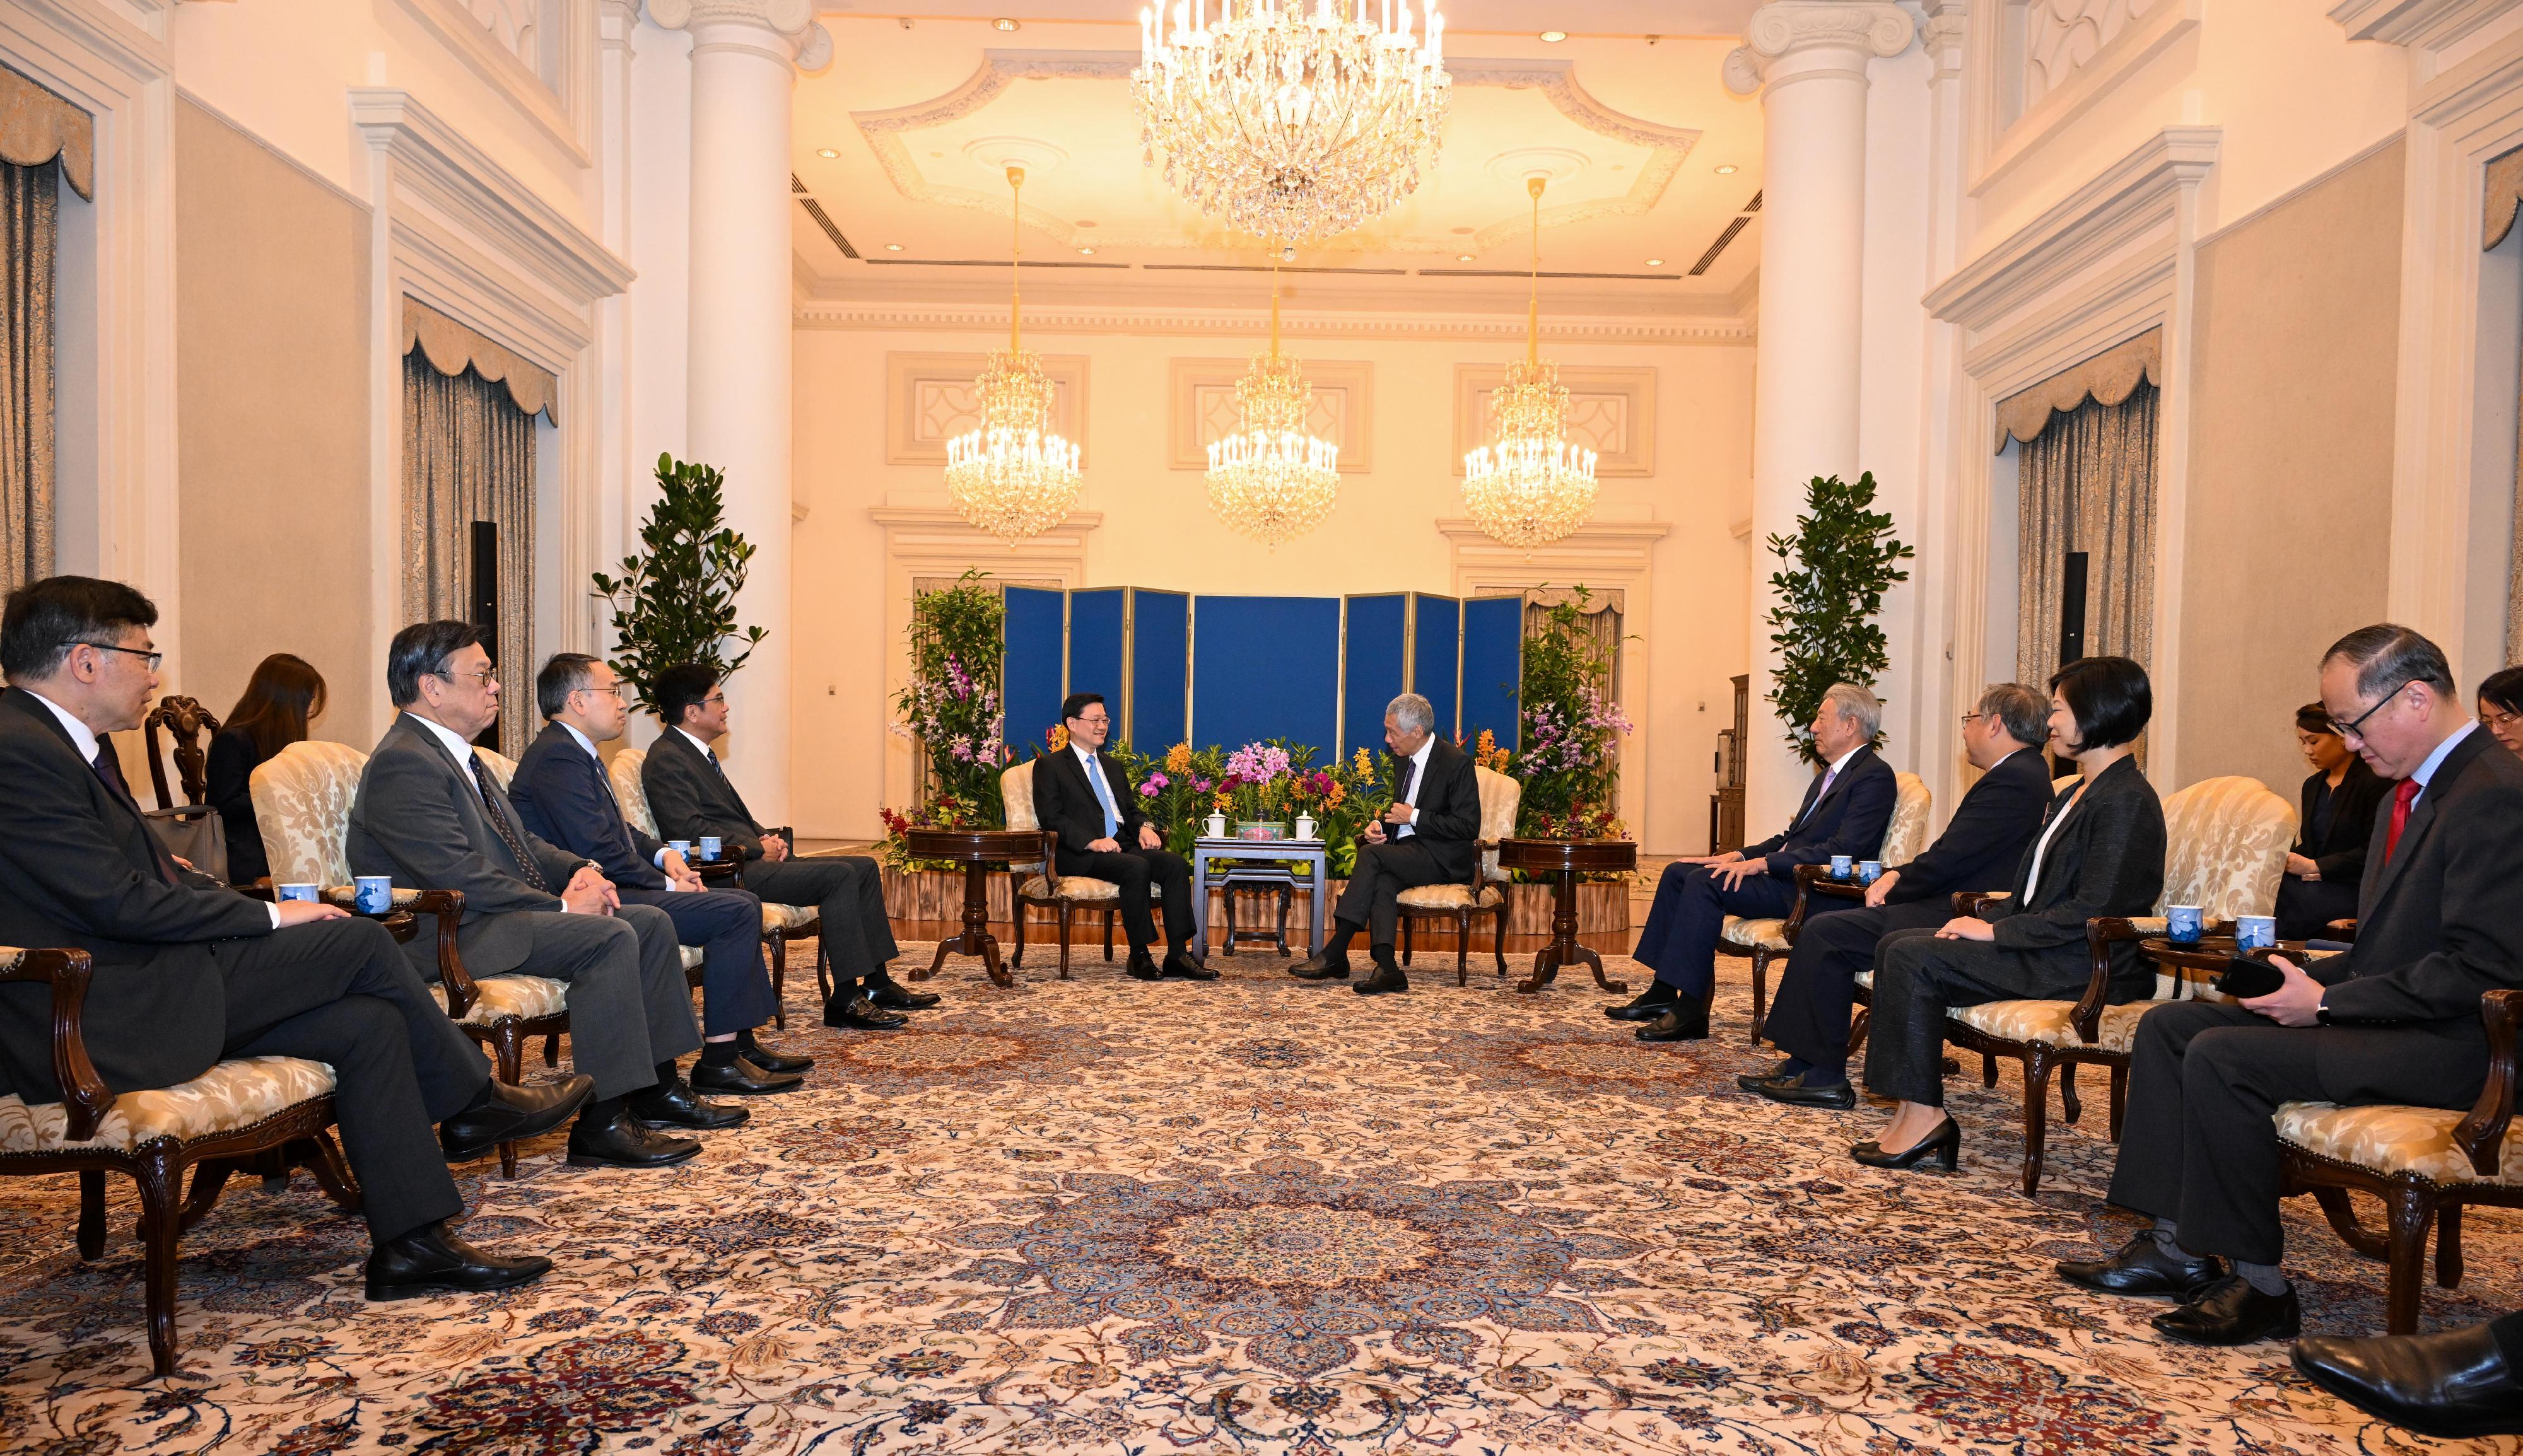 The Chief Executive, Mr John Lee, meets with the Prime Minister of Singapore, Mr Lee Hsien Loong, in Singapore today (July 24).